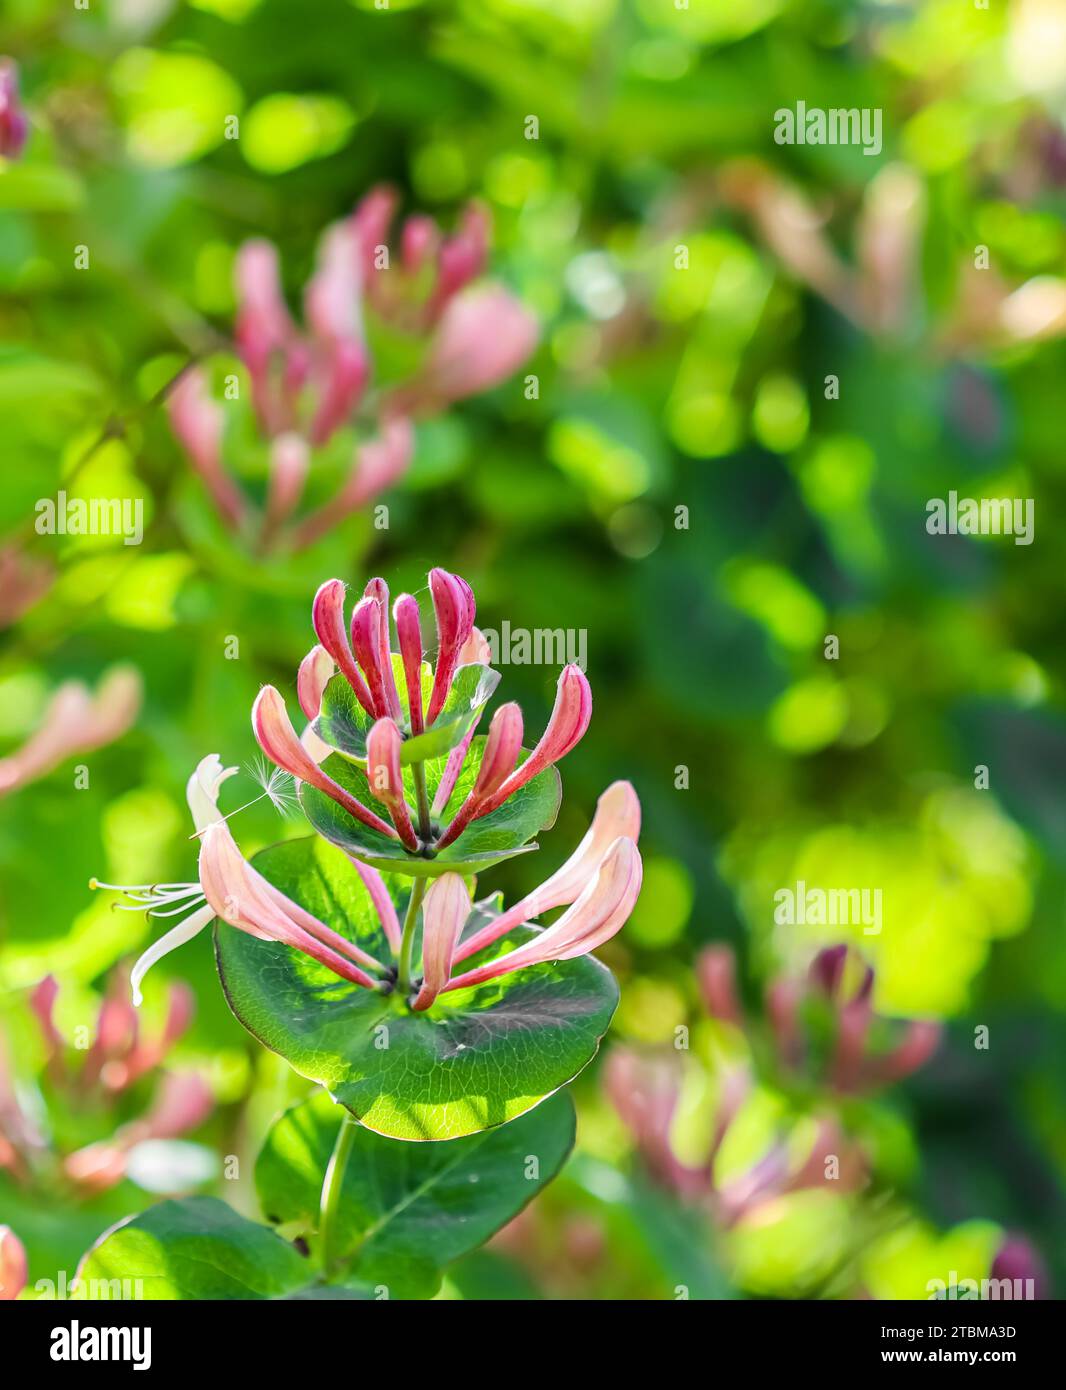 Pink Honeysuckle (Lonicera) buds and flowers in a sunny garden. Etrusca Santi caprifolium, woodbine in bloom. Gardening concept. Floral background Stock Photo